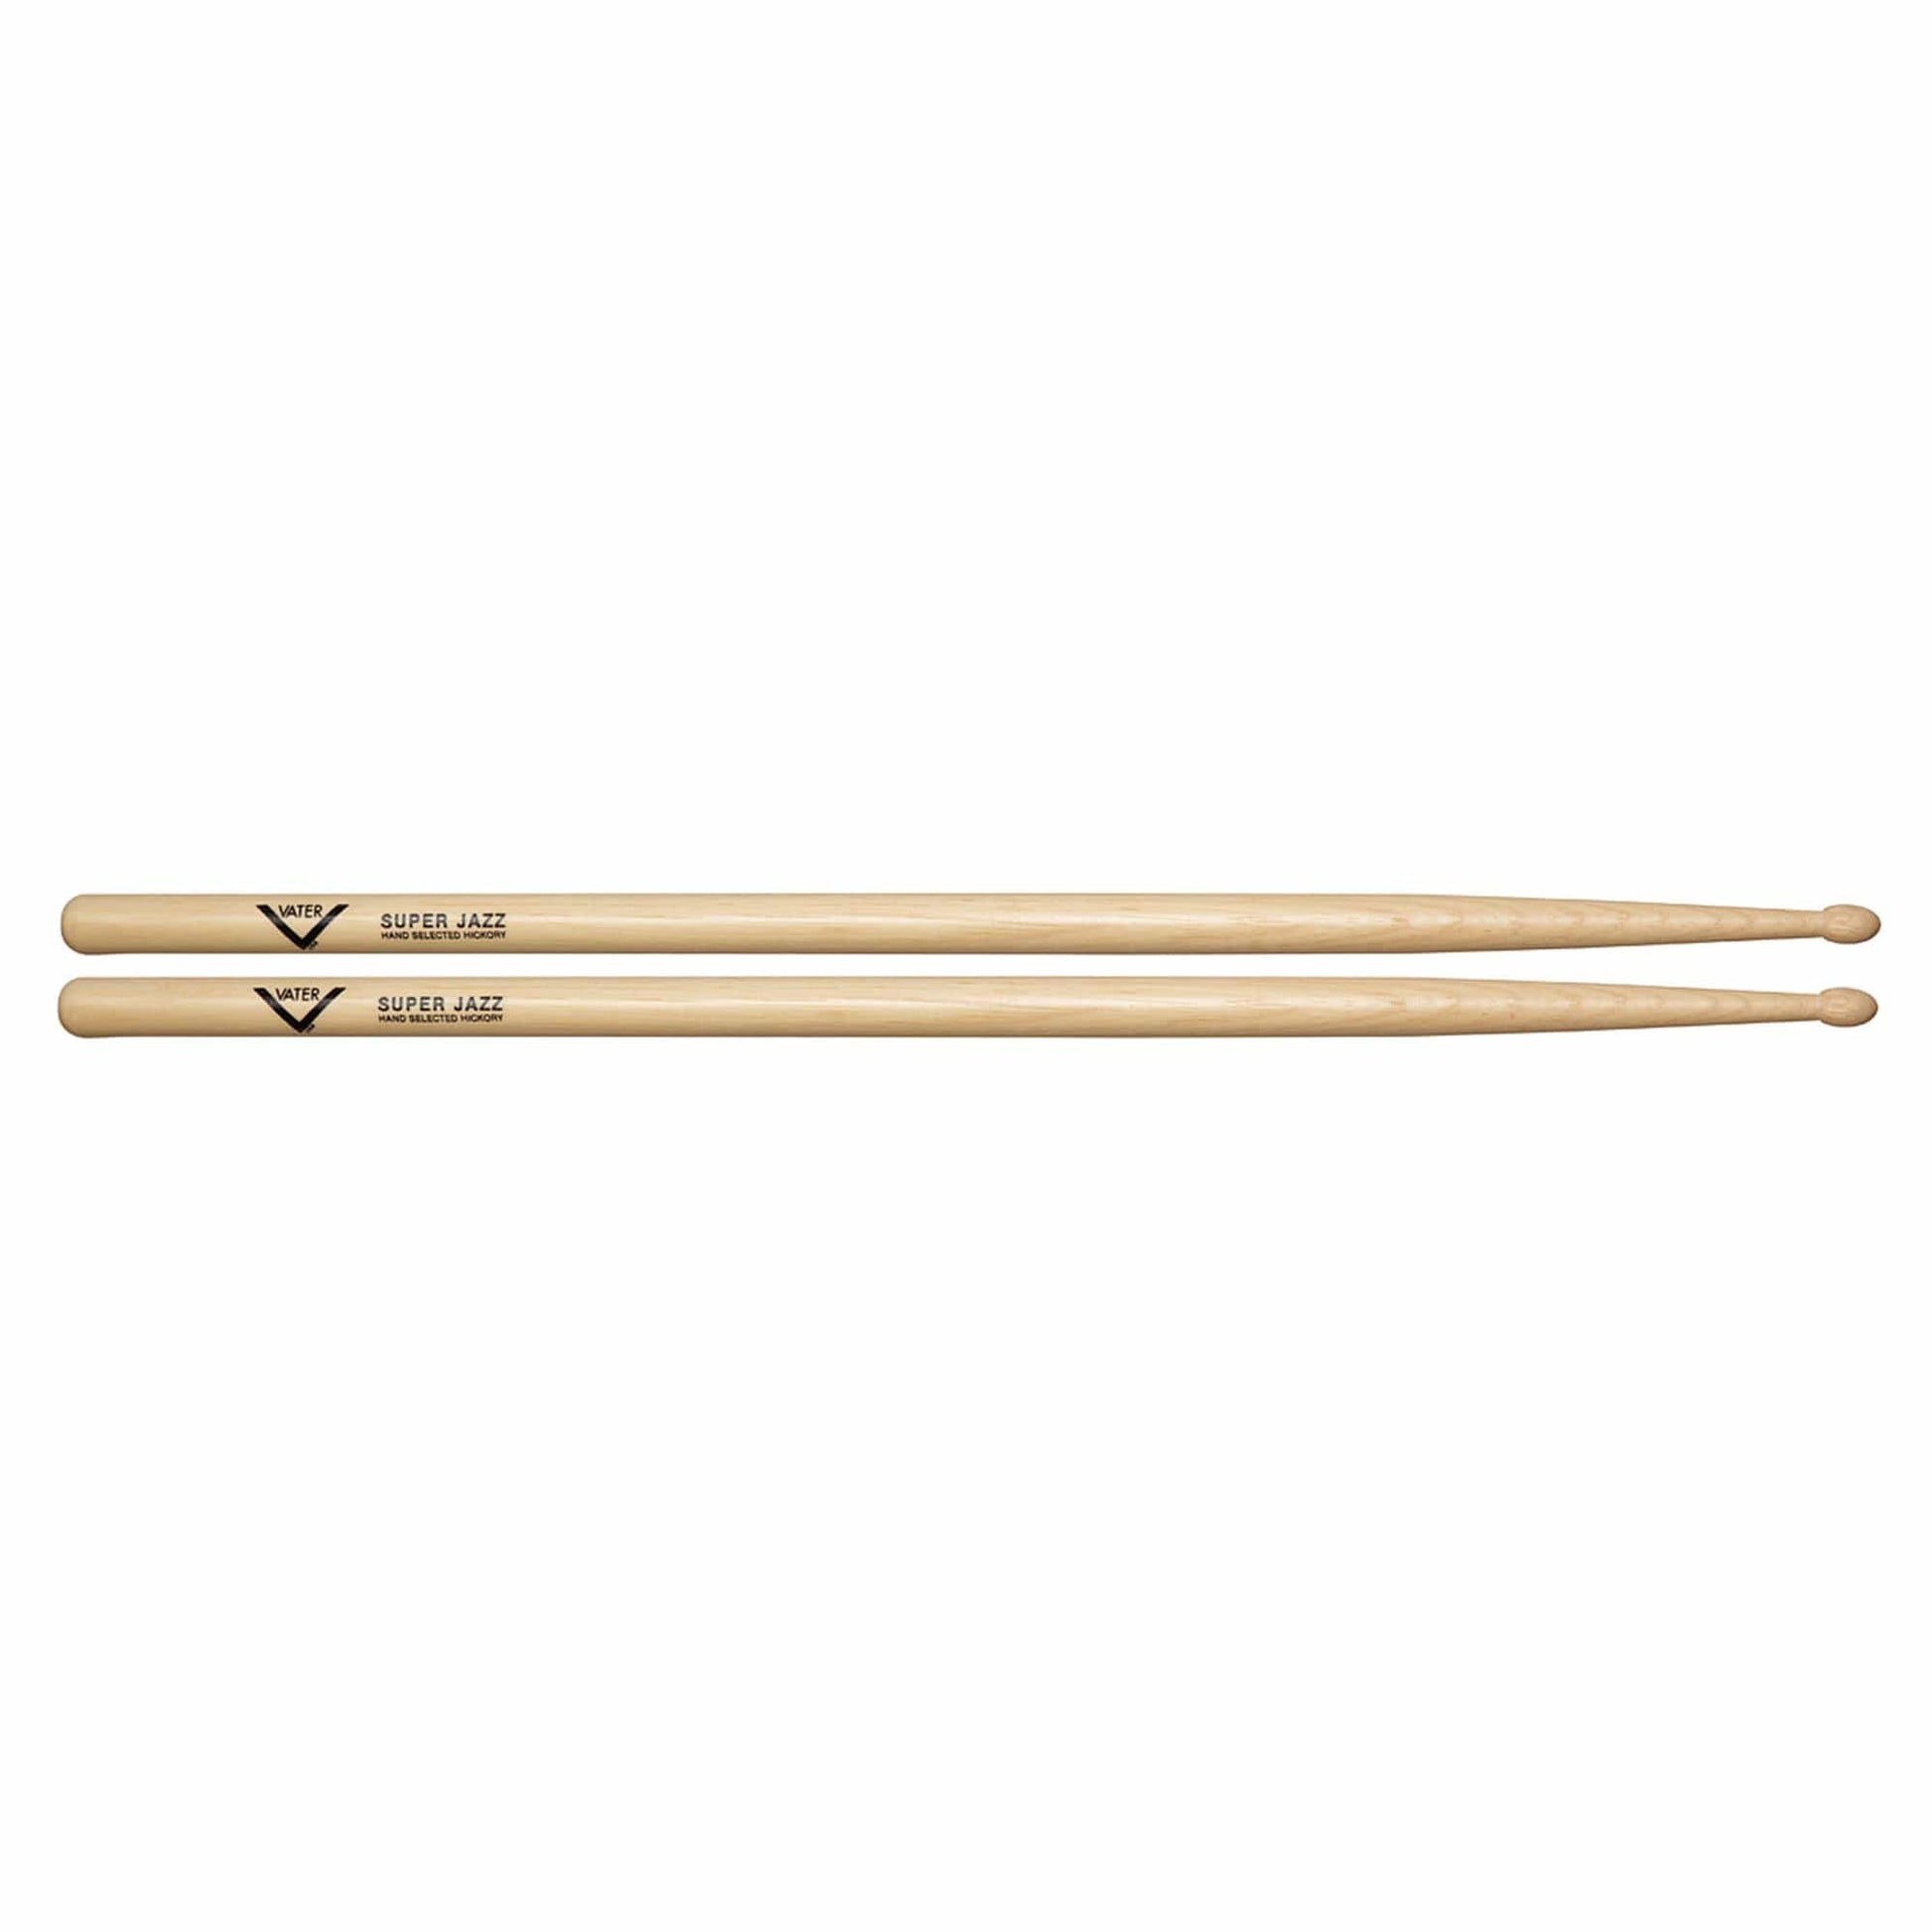 Vater Hickory Super Jazz Wood Tip Drum Sticks Drums and Percussion / Parts and Accessories / Drum Sticks and Mallets